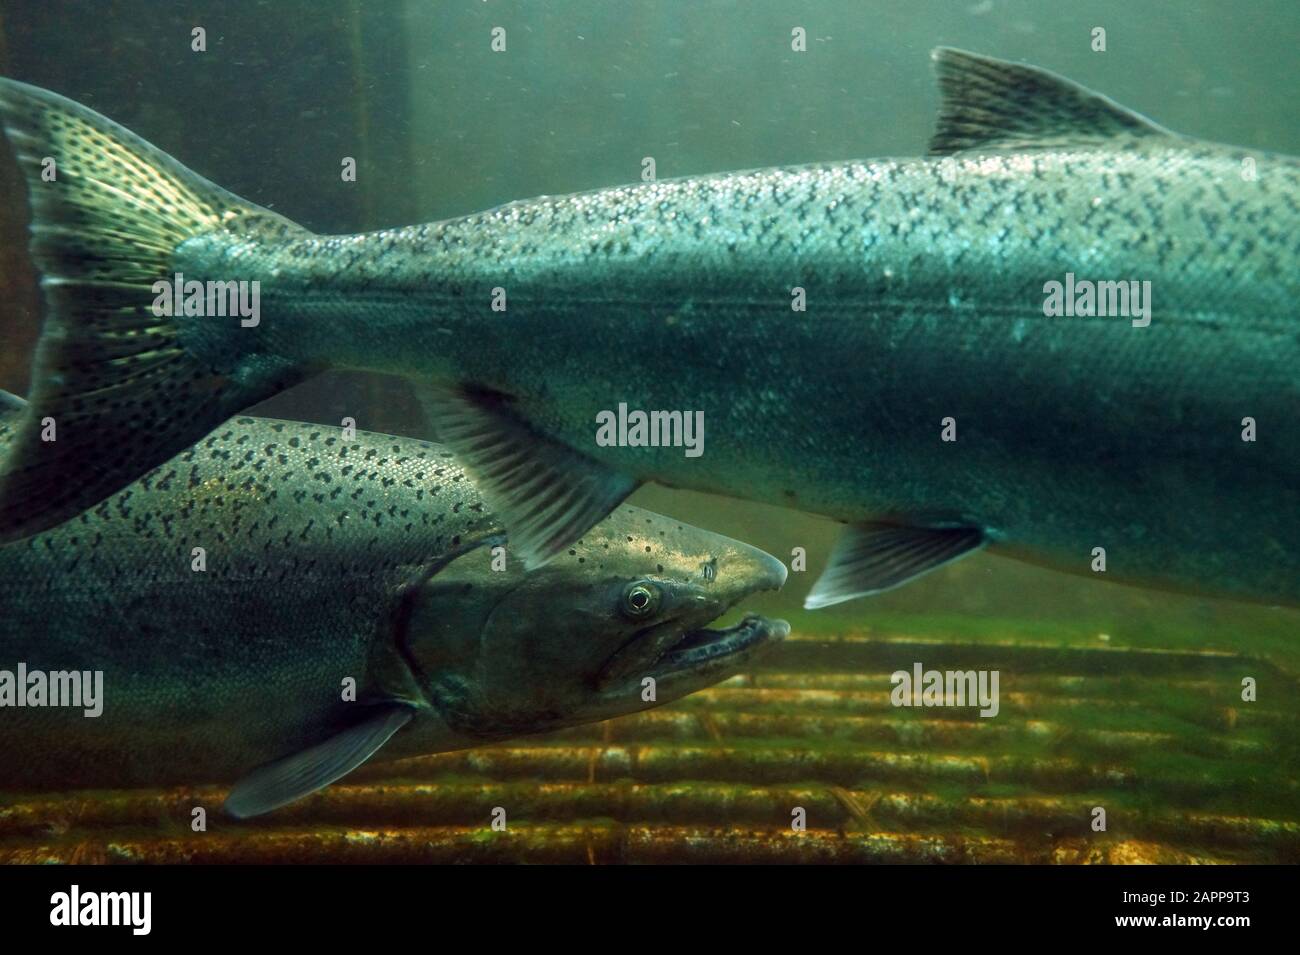 Fish on their way to spawning, view from Ballard Locks in Seattle. The Chinook salmon (Oncorhynchus tshawytscha) also called king salmon. Stock Photo